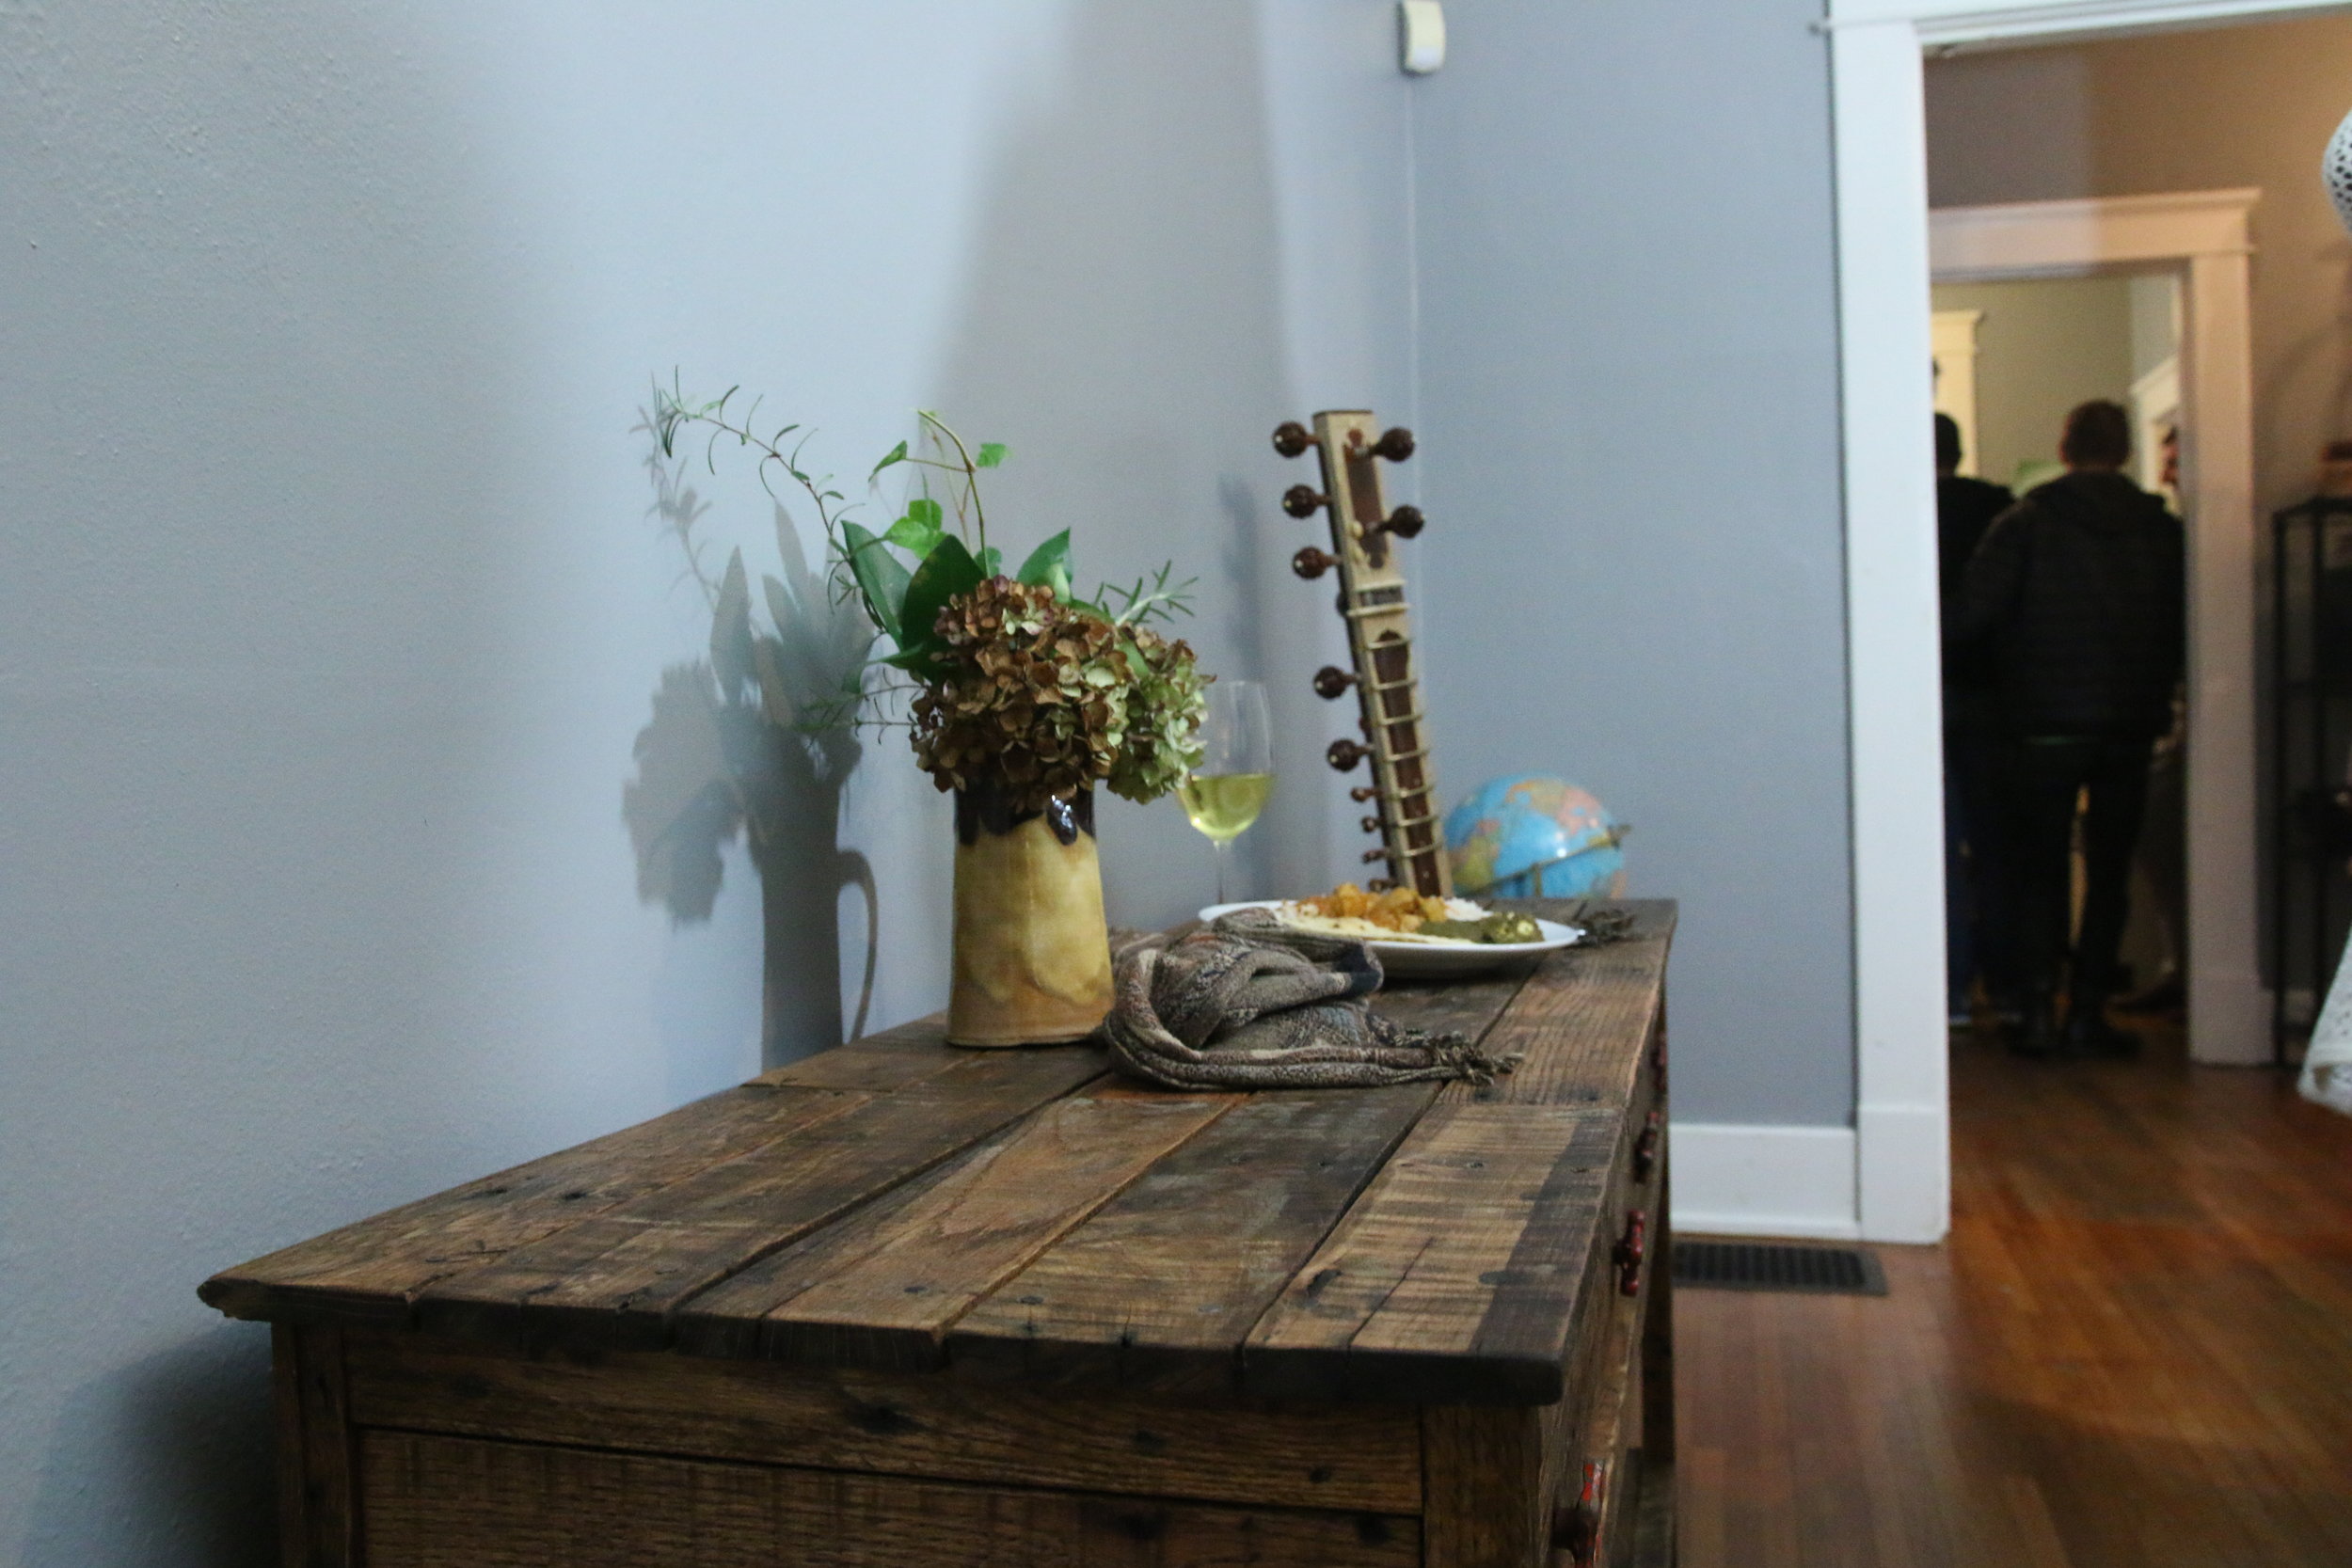   View Our Handmade Pallet Furniture  